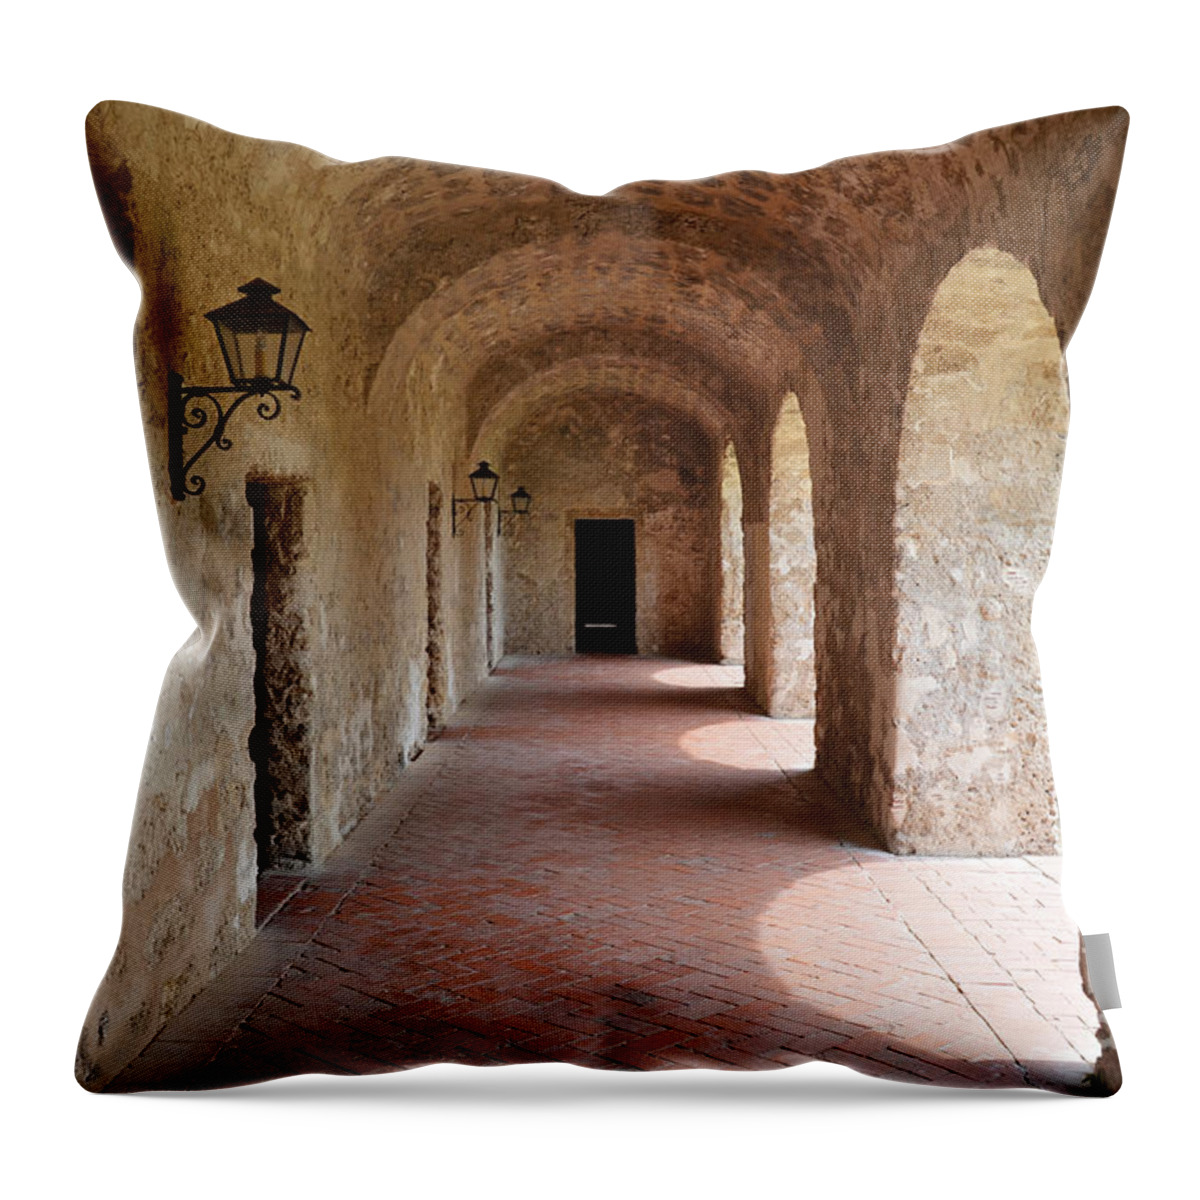 San Antonio Throw Pillow featuring the photograph Mission Concepcion Promenade Walkway in San Antonio Missions National Historical Park Texas by Shawn O'Brien